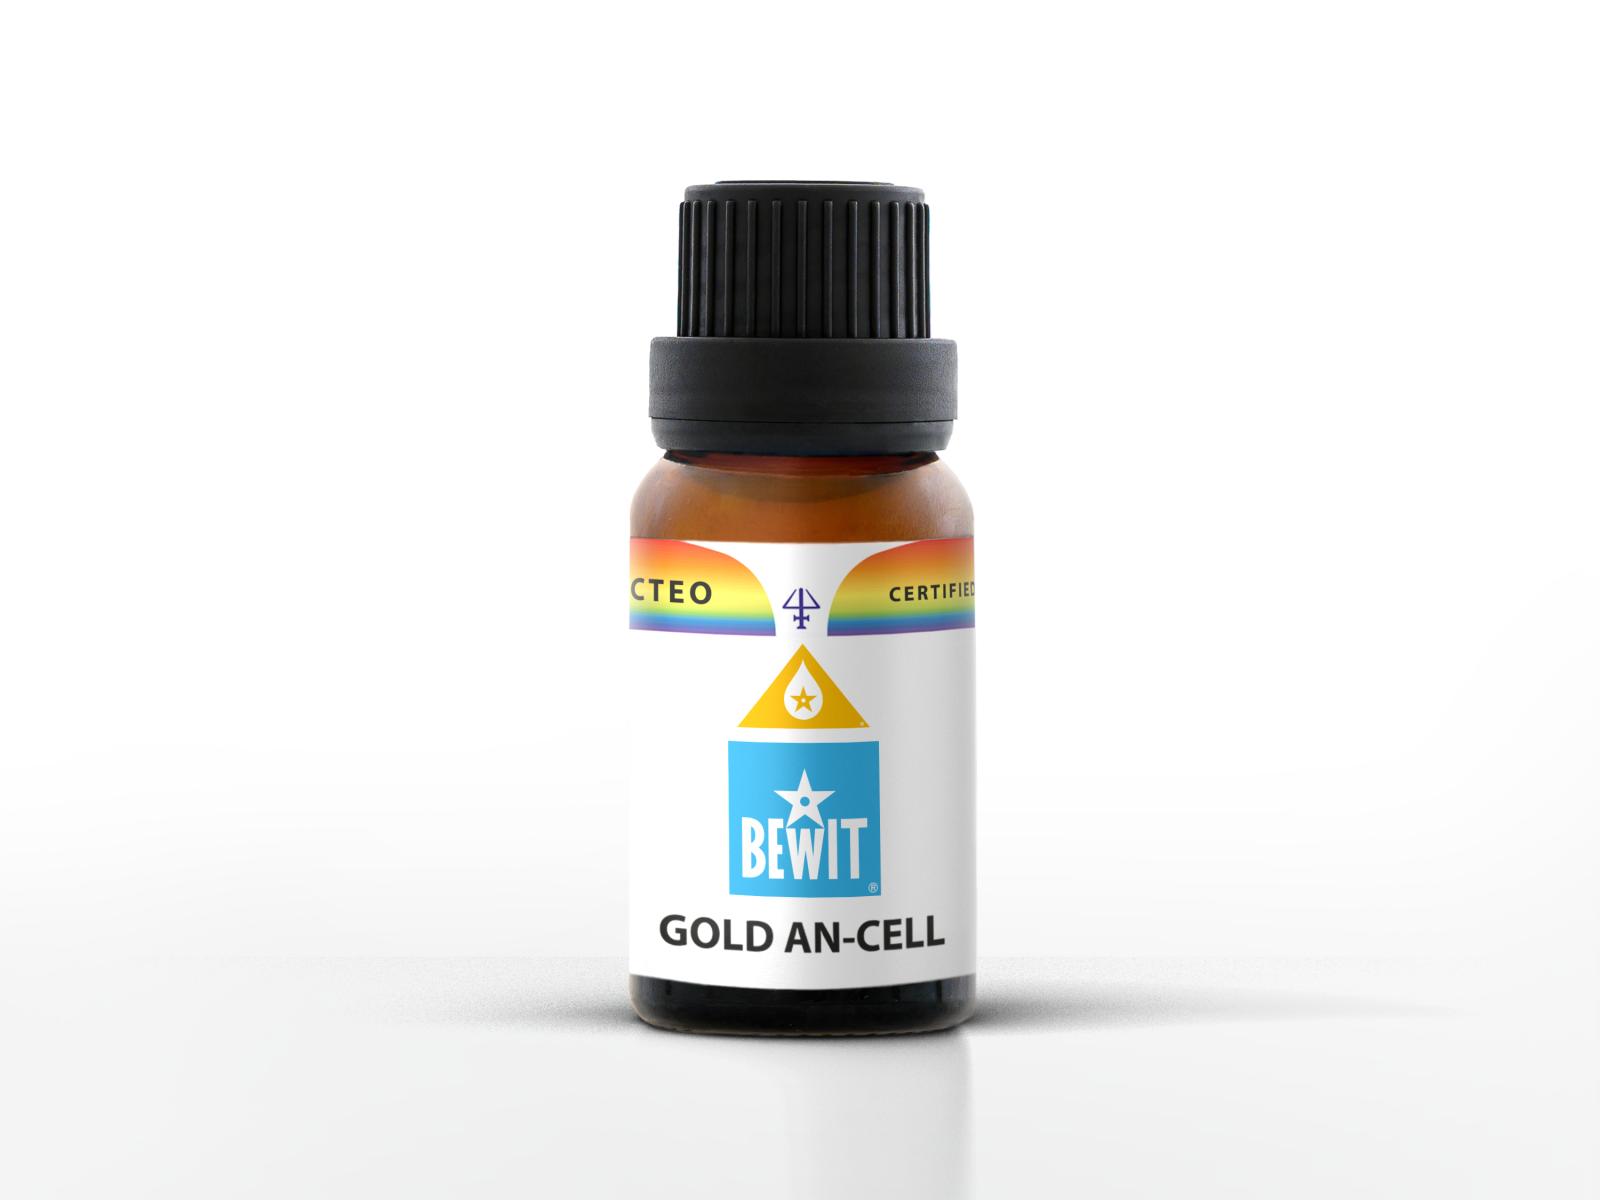 BEWIT GOLD AN-CELL - Blend of essential oils - 1